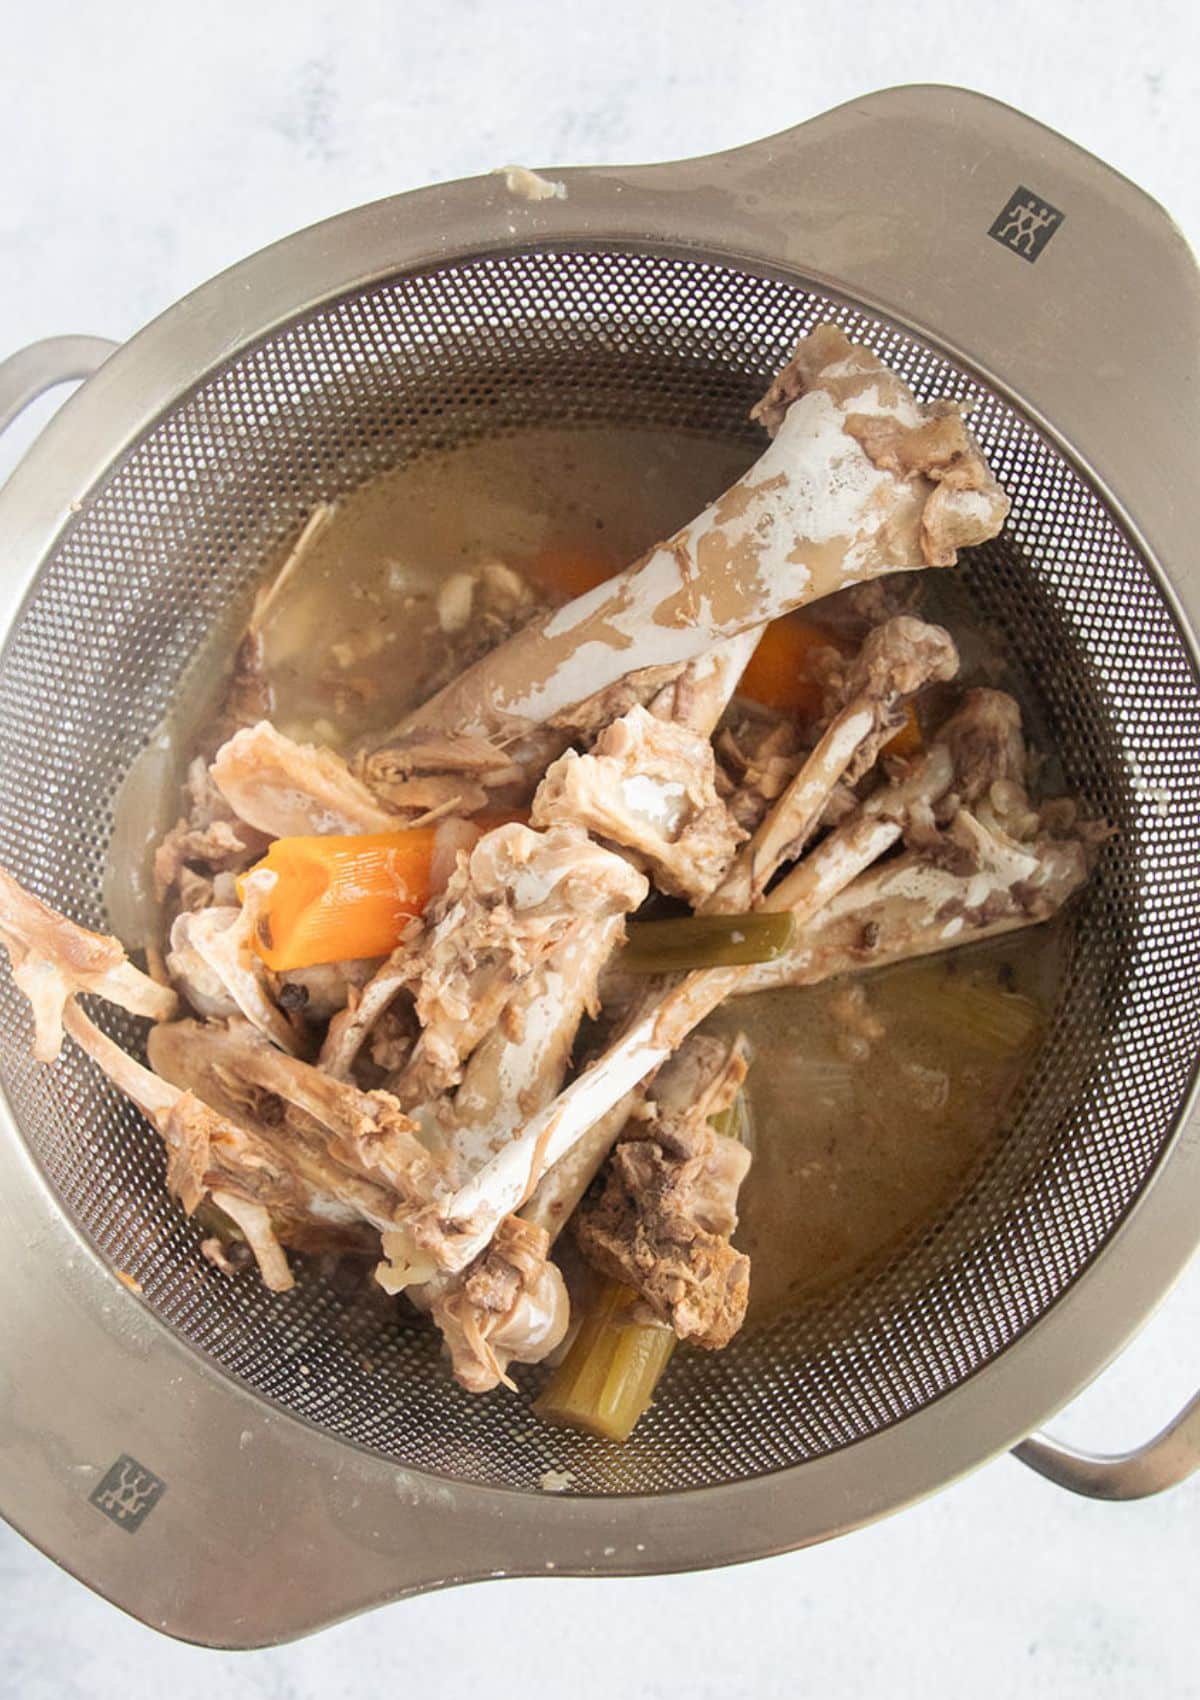 straining broth through a sieve leaving the bones and vegetables behind.